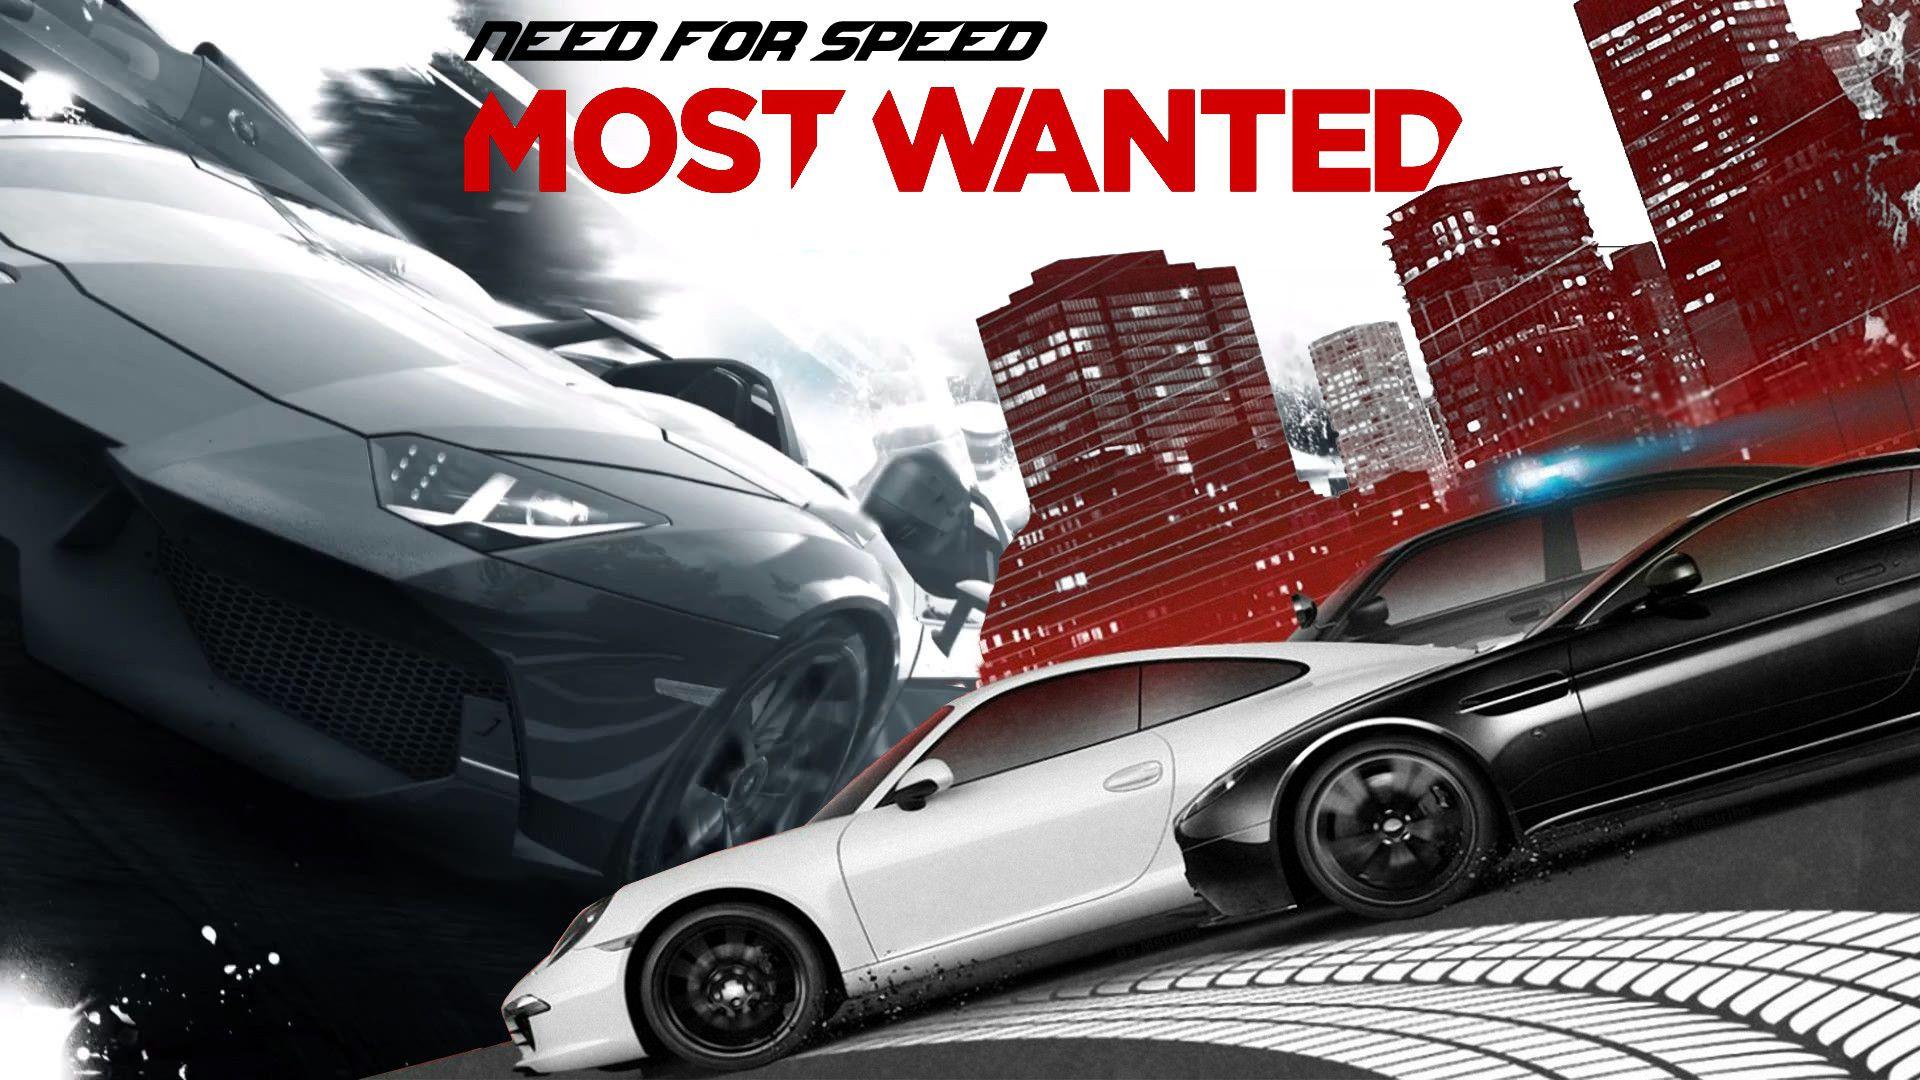 HD Need For Speed: Most Wanted Wallpaper